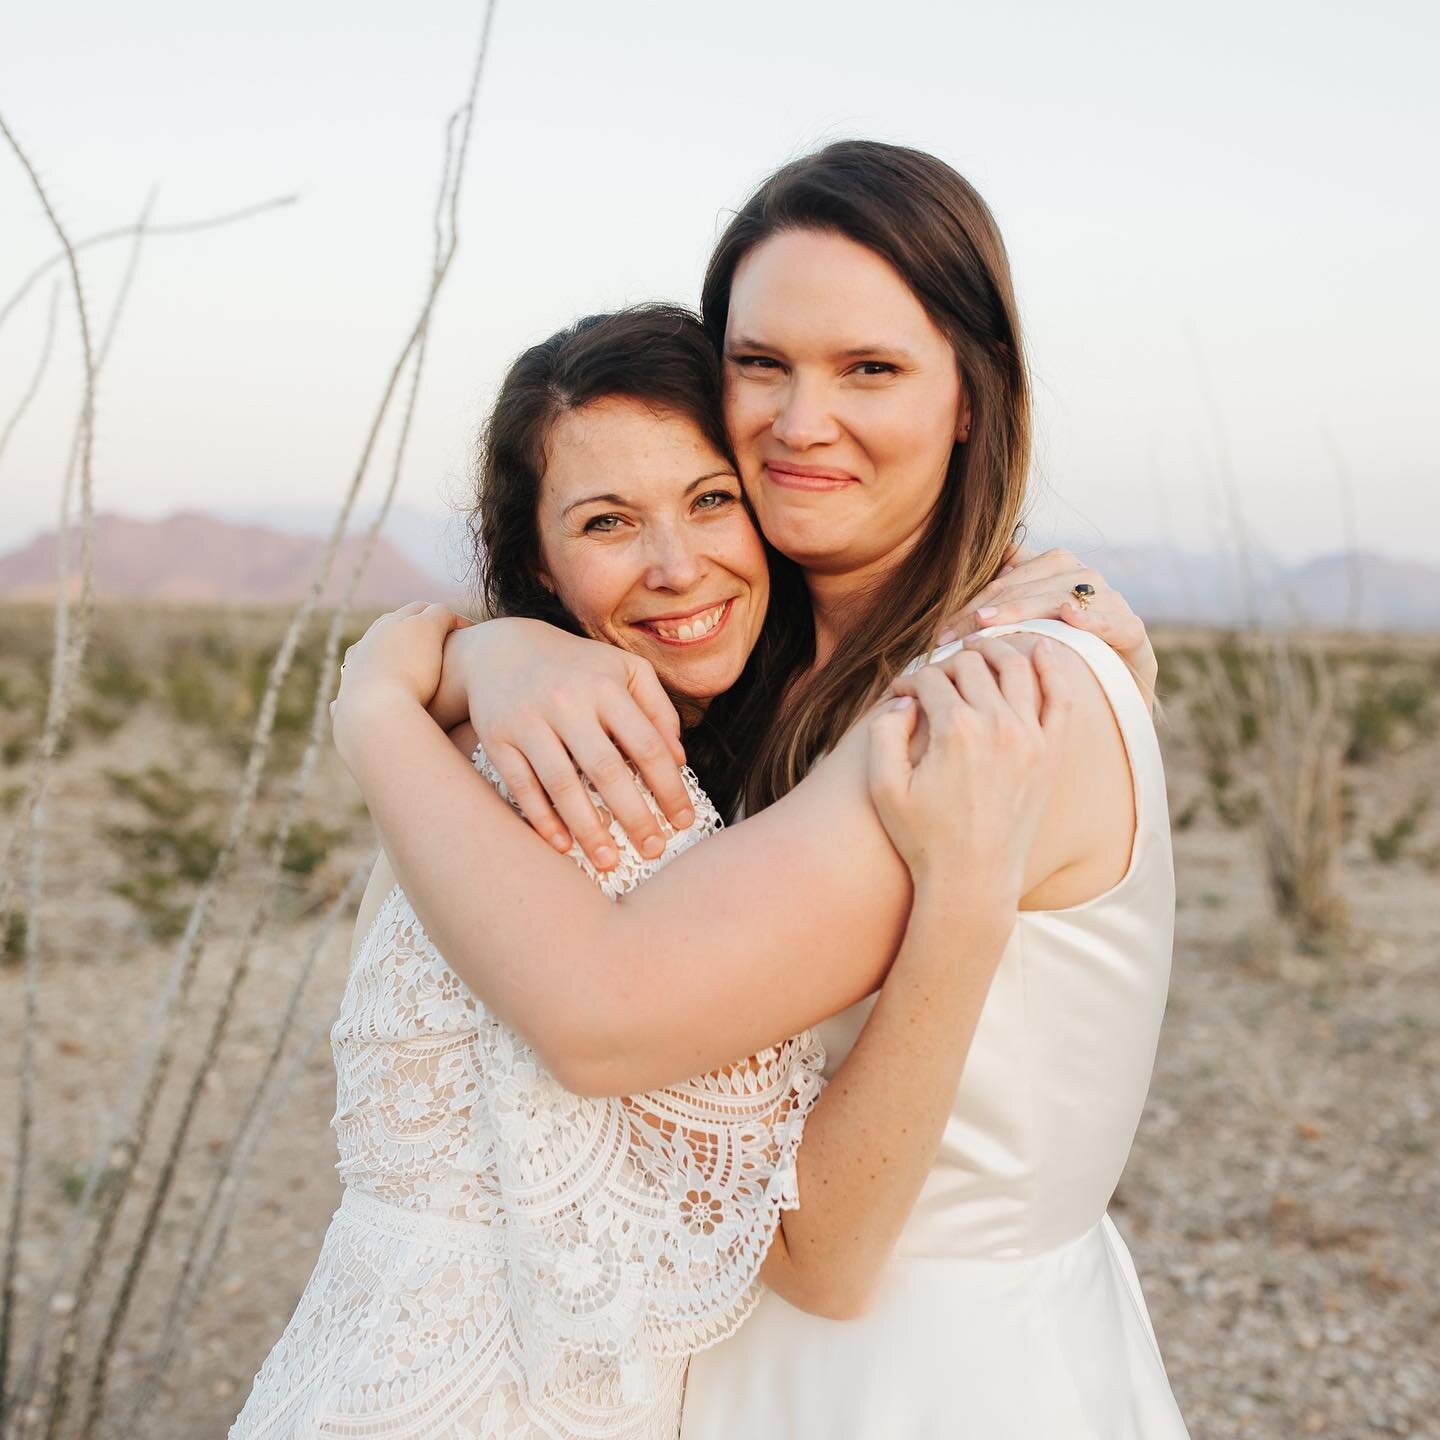 Megan &amp; Sarah are the open-armed, kind, adventurous, salt-of-the-earth friends everyone needs in their life. 
⠀⠀⠀⠀⠀⠀⠀⠀⠀
Lucky to know them and photograph their desert wedding. 🏜️